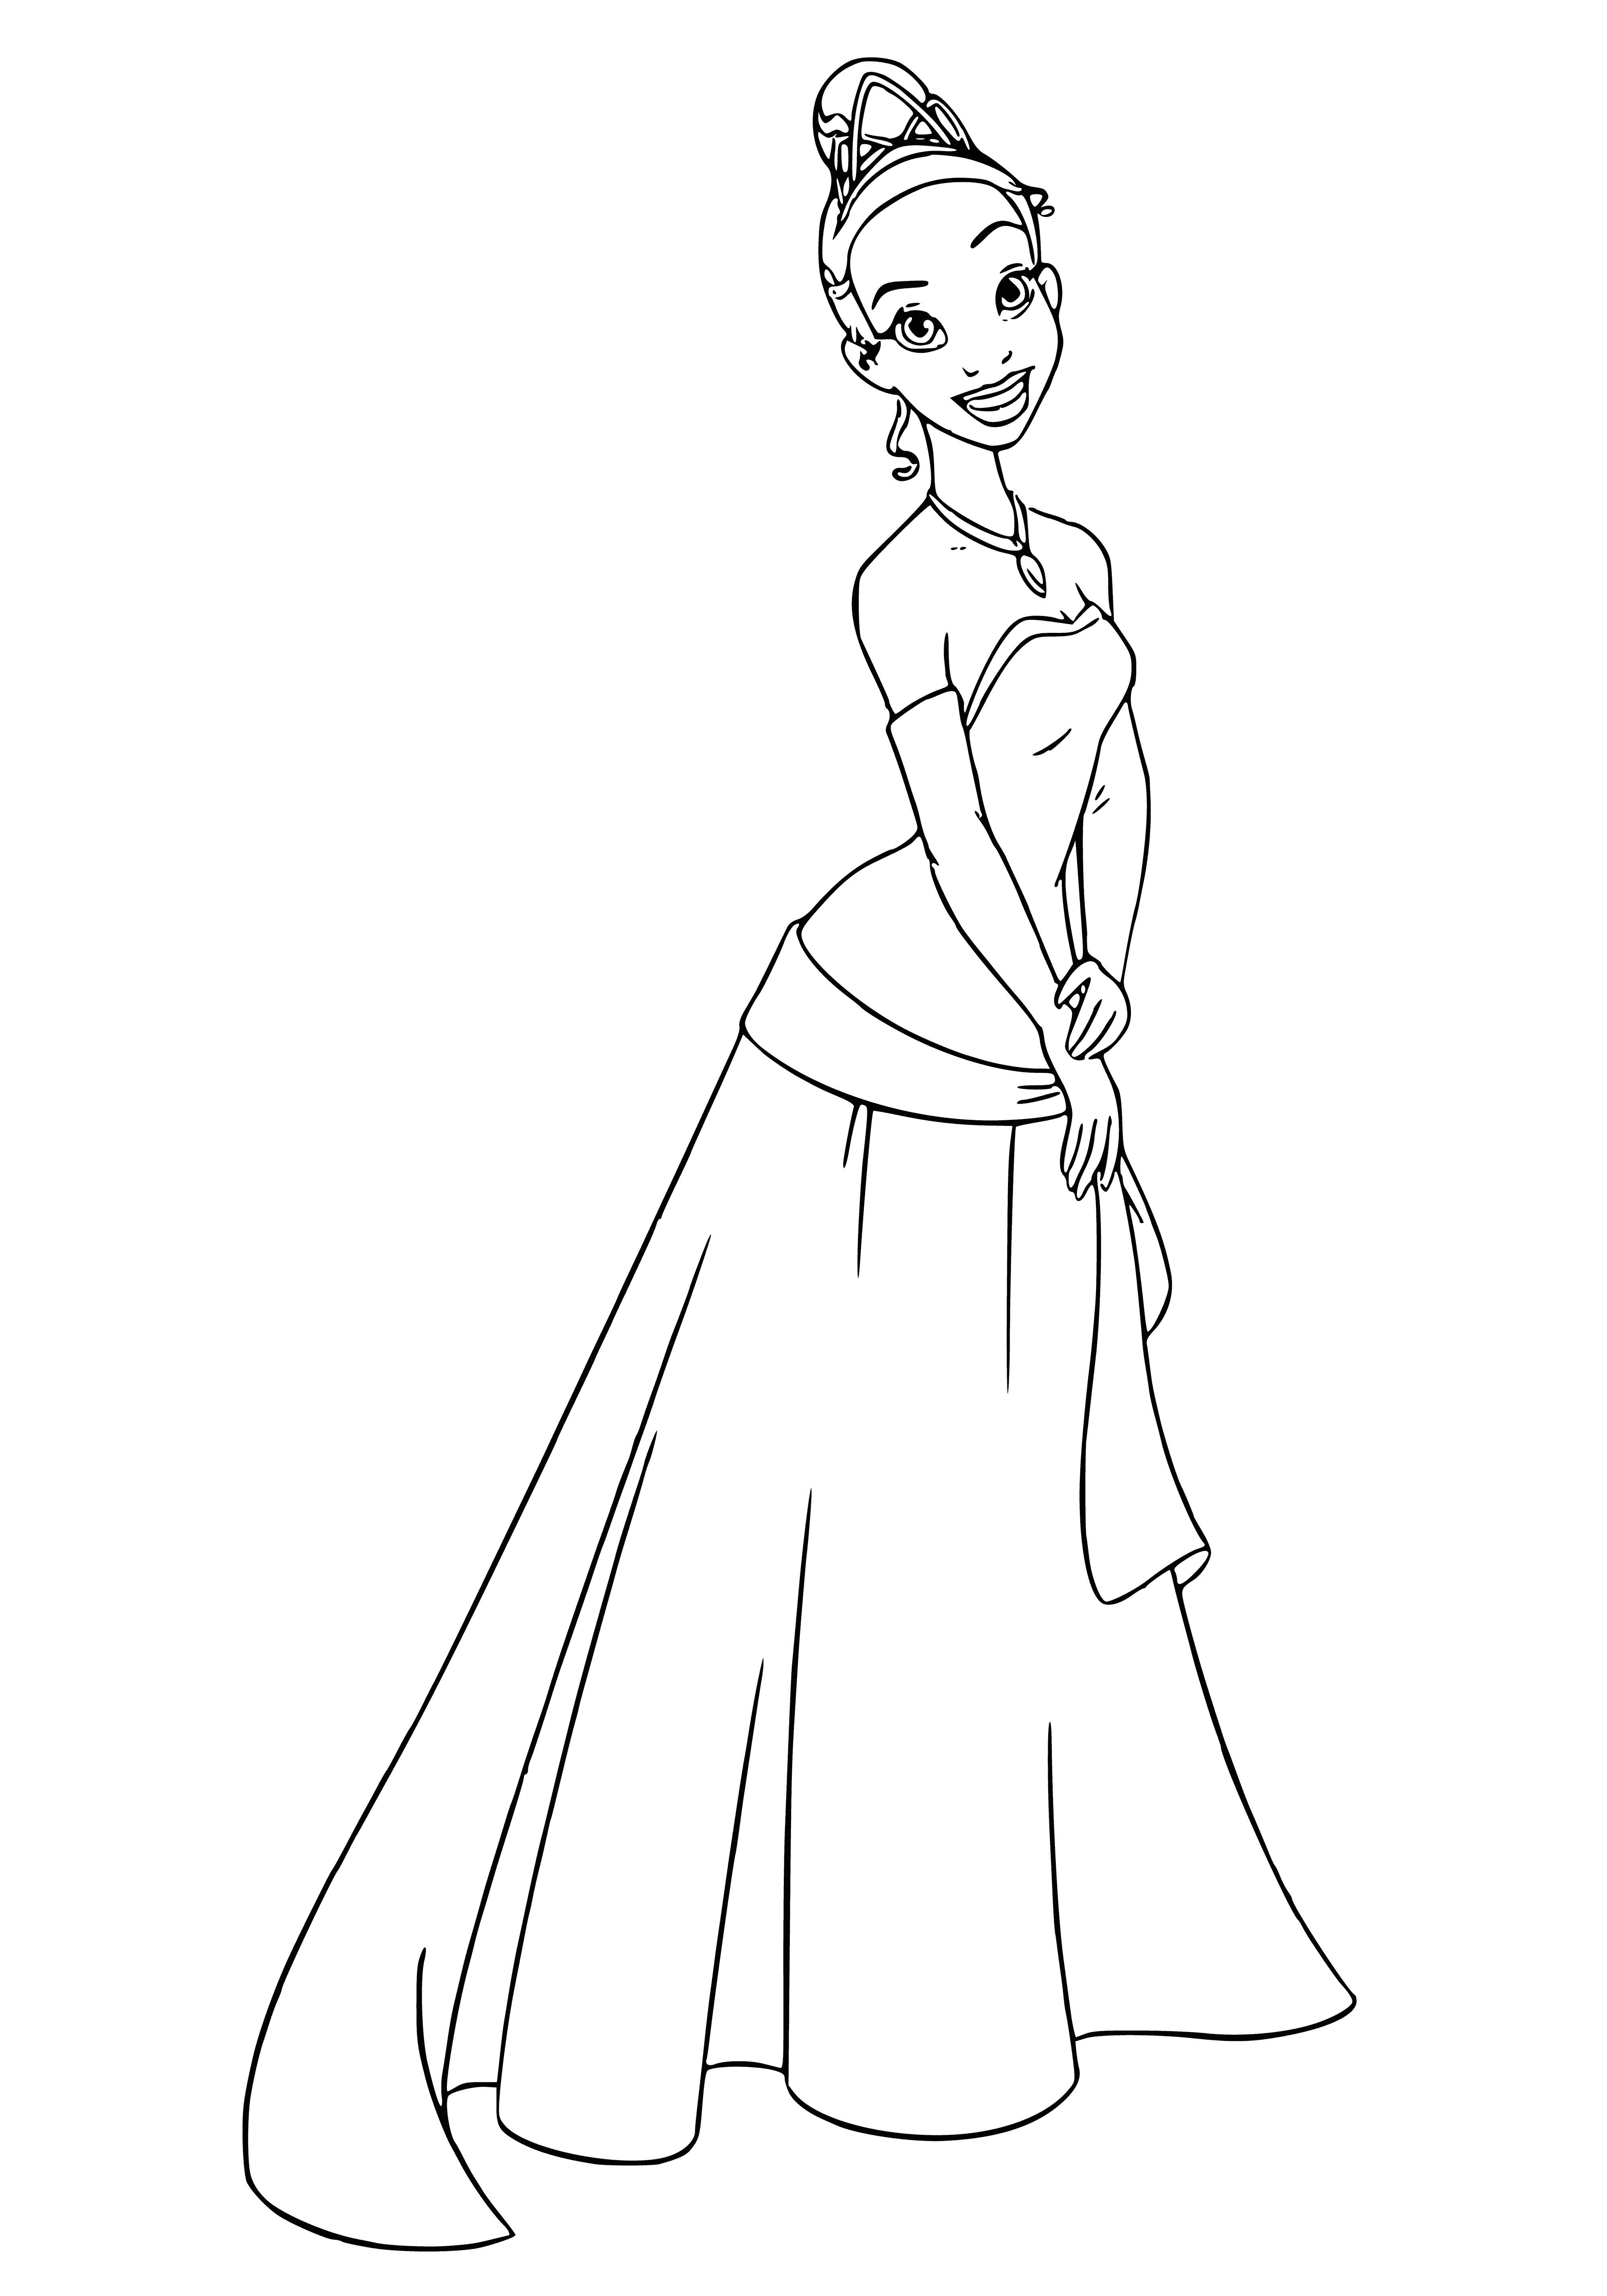 coloring page: Young woman wearing green dress w/ feather headband smiles, looking at camera in front of a building.